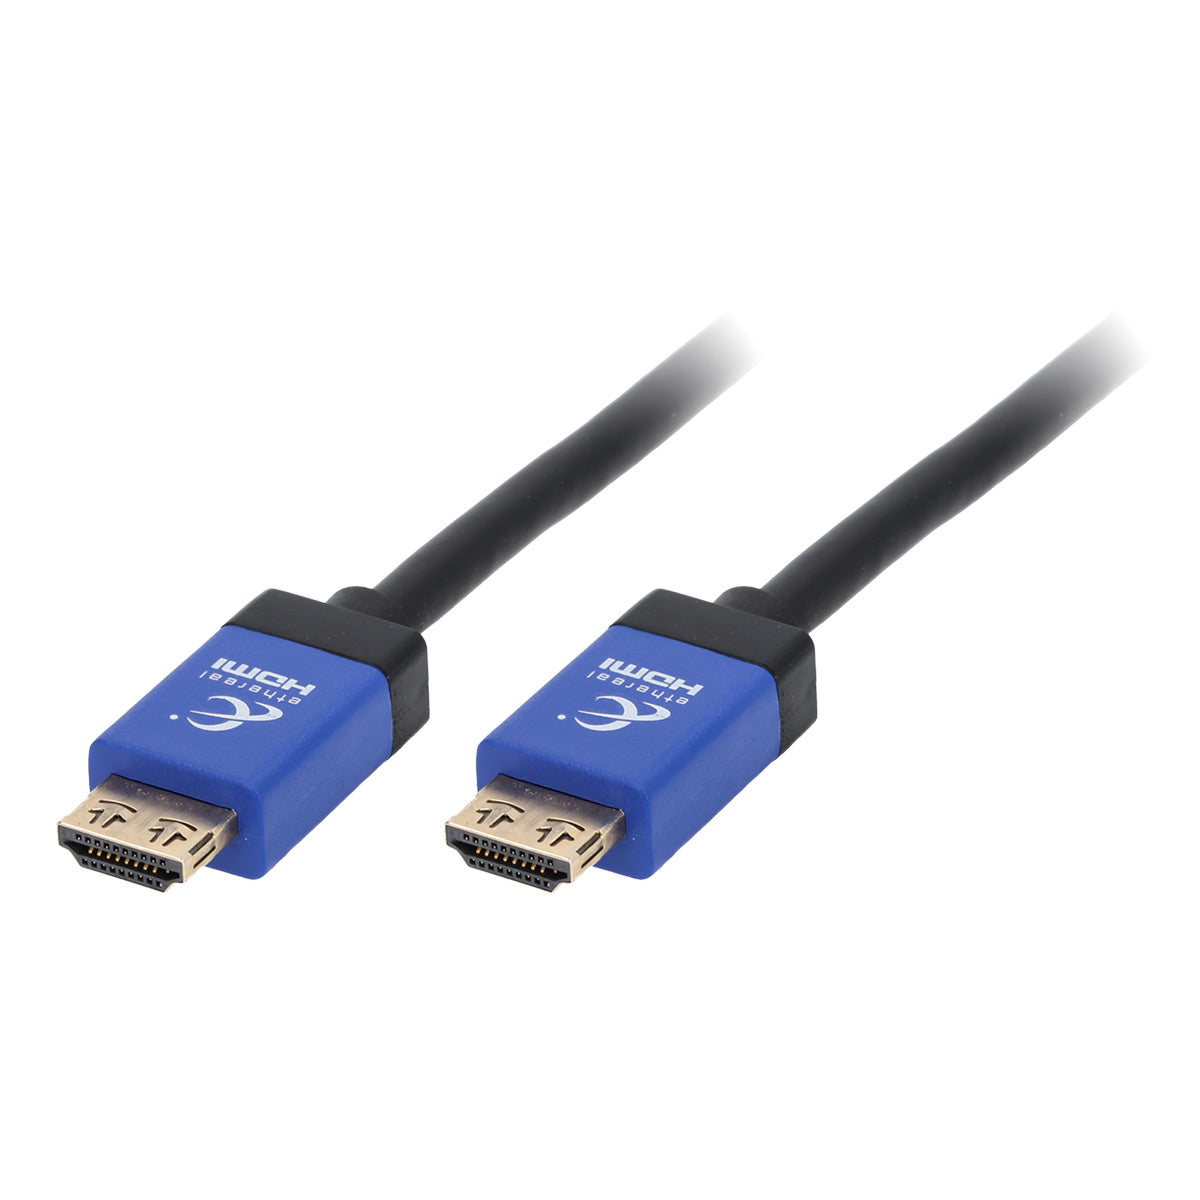 Ethereal MHY-LUHDME Ultra-Flex Slim HDMI Cable - 6.56 ft. (2m)